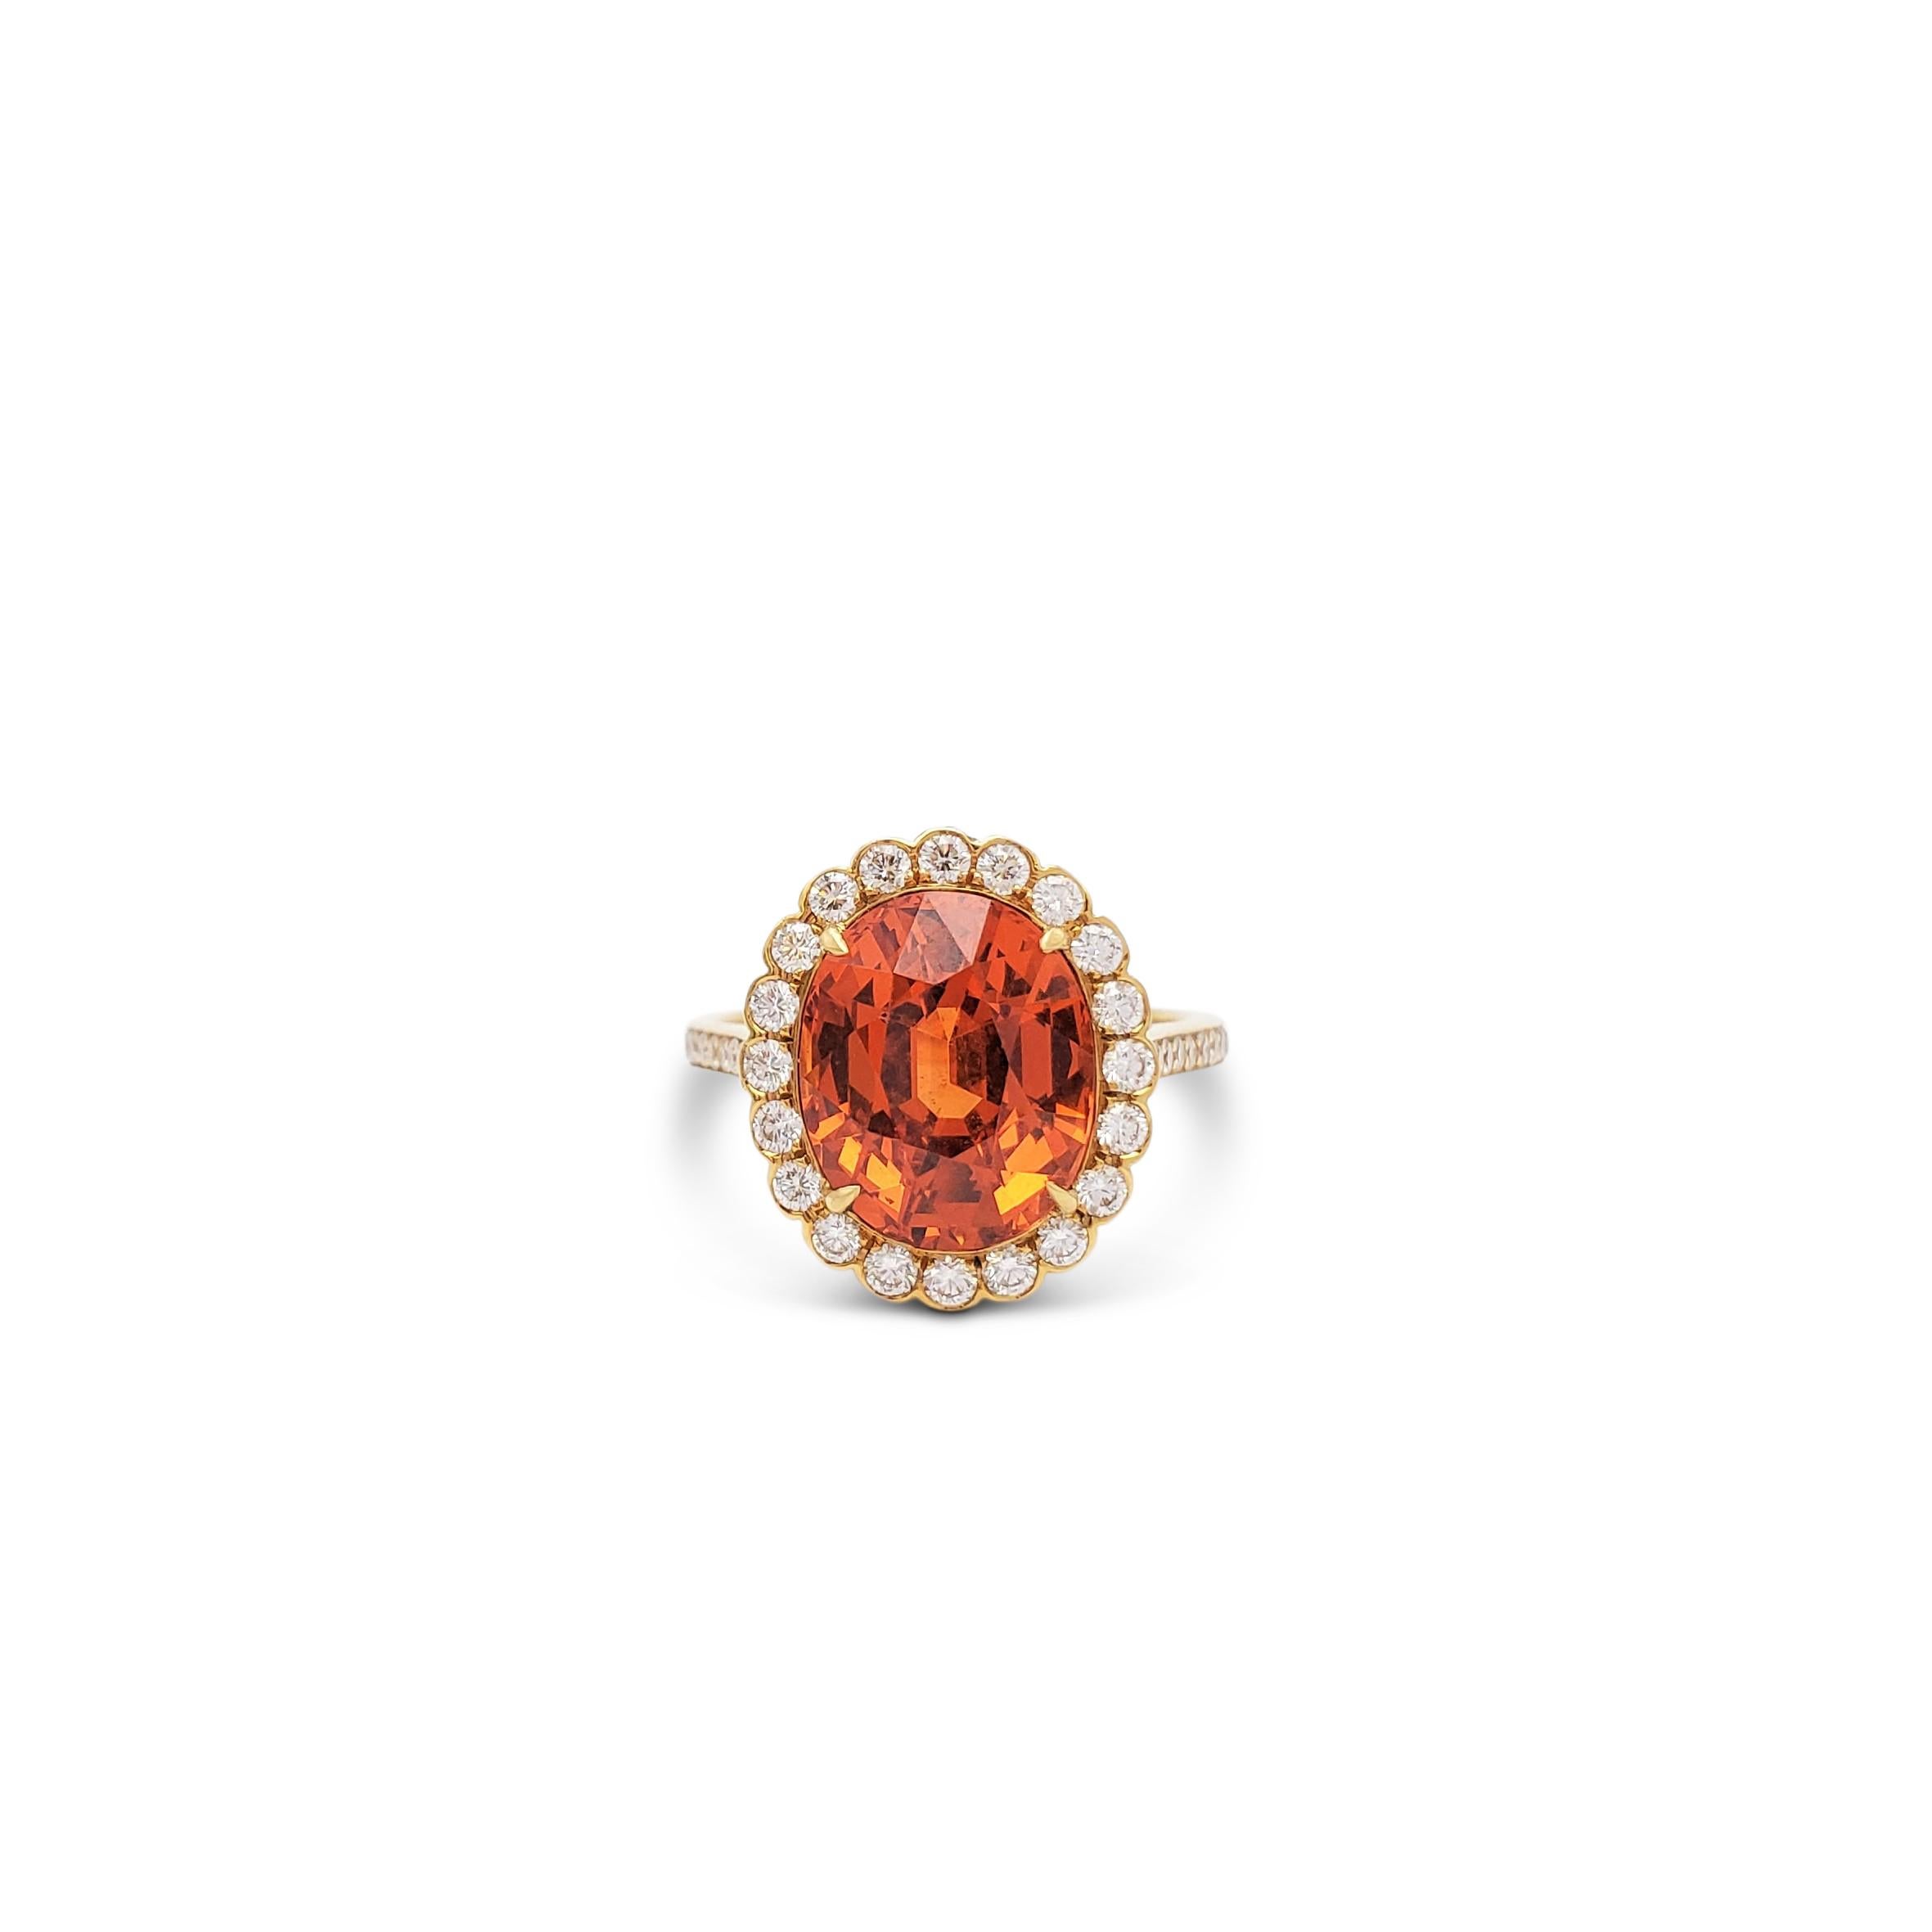 An authentic Tiffany & Co. ring crafted in 18 karat yellow gold centering on a striking orange-hued natural spessartite garnet weighing 6.11 carats which is highlighted by a halo of round brilliant cut diamonds (E-F color, VS clarity) weighing an